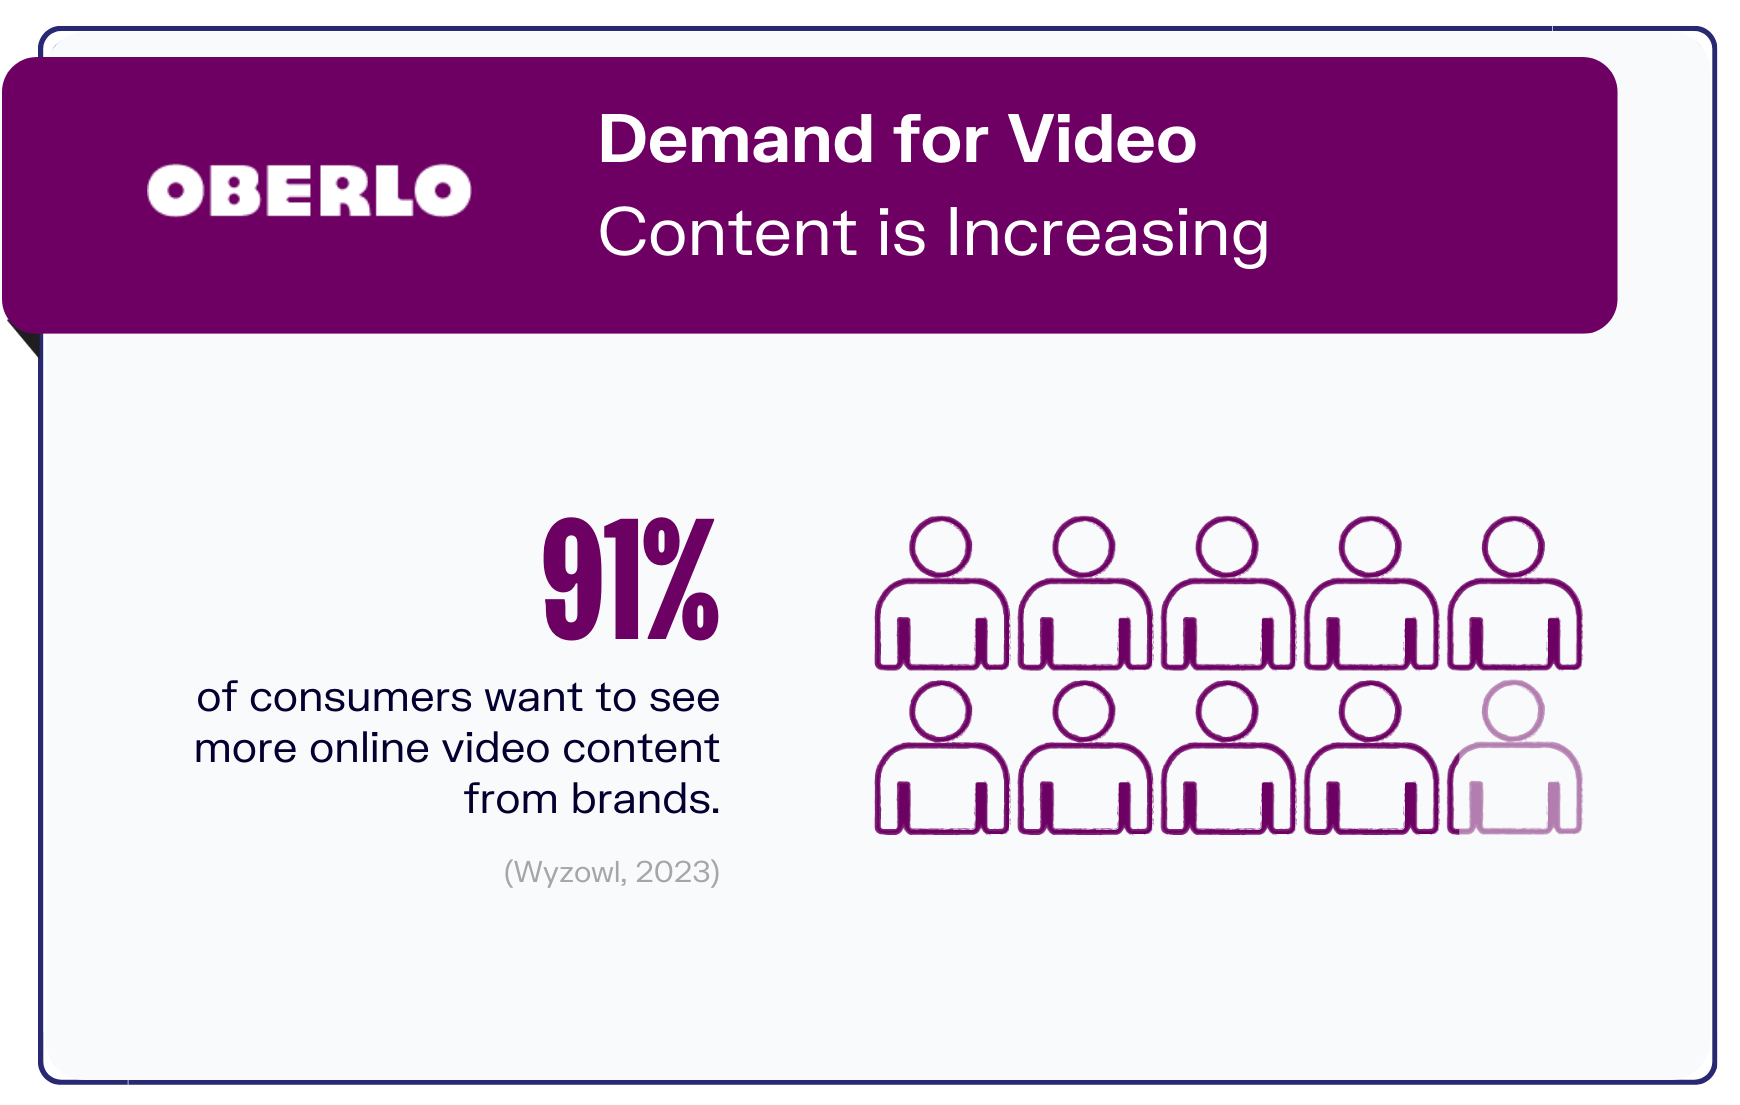 Demand for video content